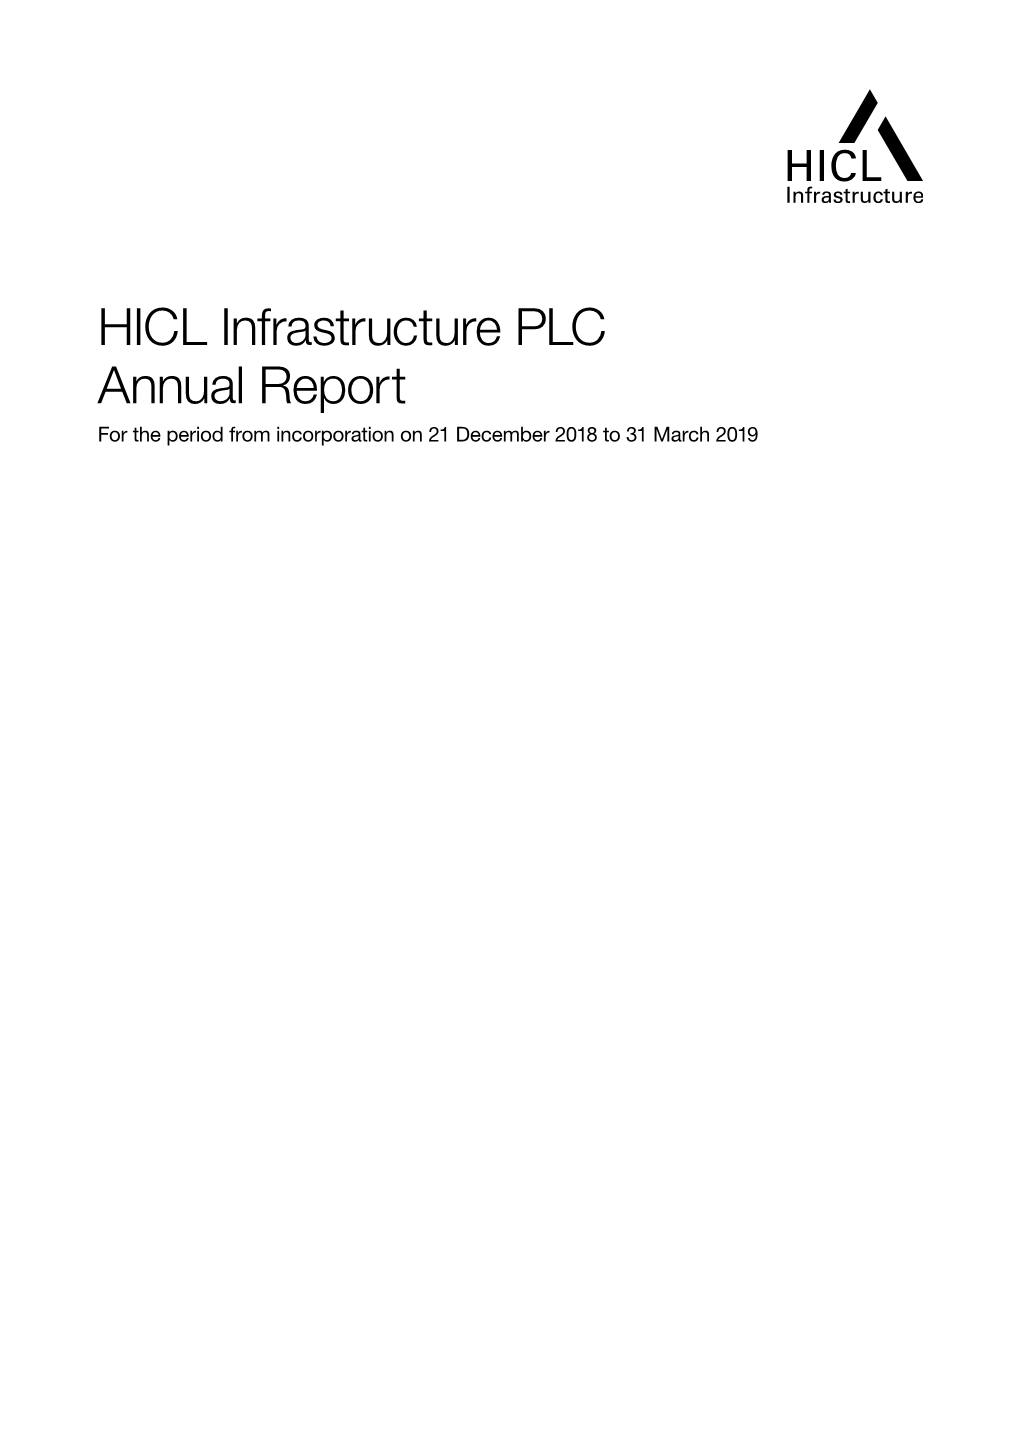 HICL Infrastructure PLC Annual Report for the Period from Incorporation on 21 December 2018 to 31 March 2019 Contents